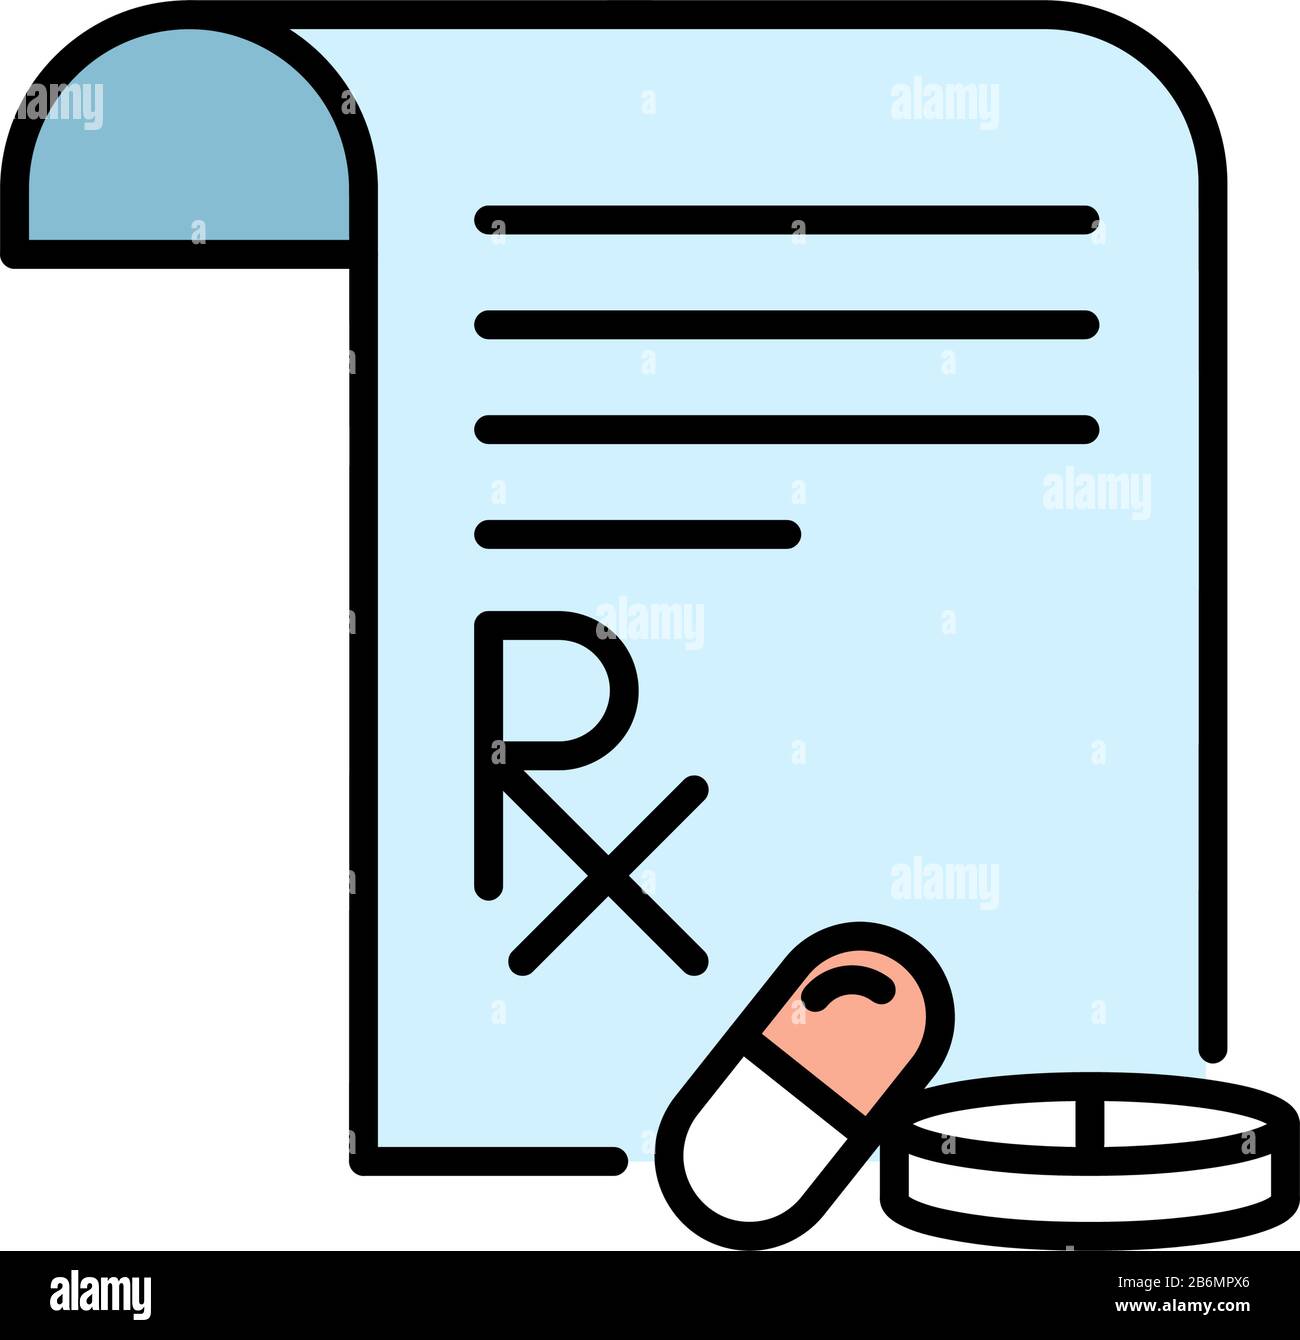 Medical prescription icon. Medicine doctor health care. Flat style illustration. Isolated on white background. Stock Vector